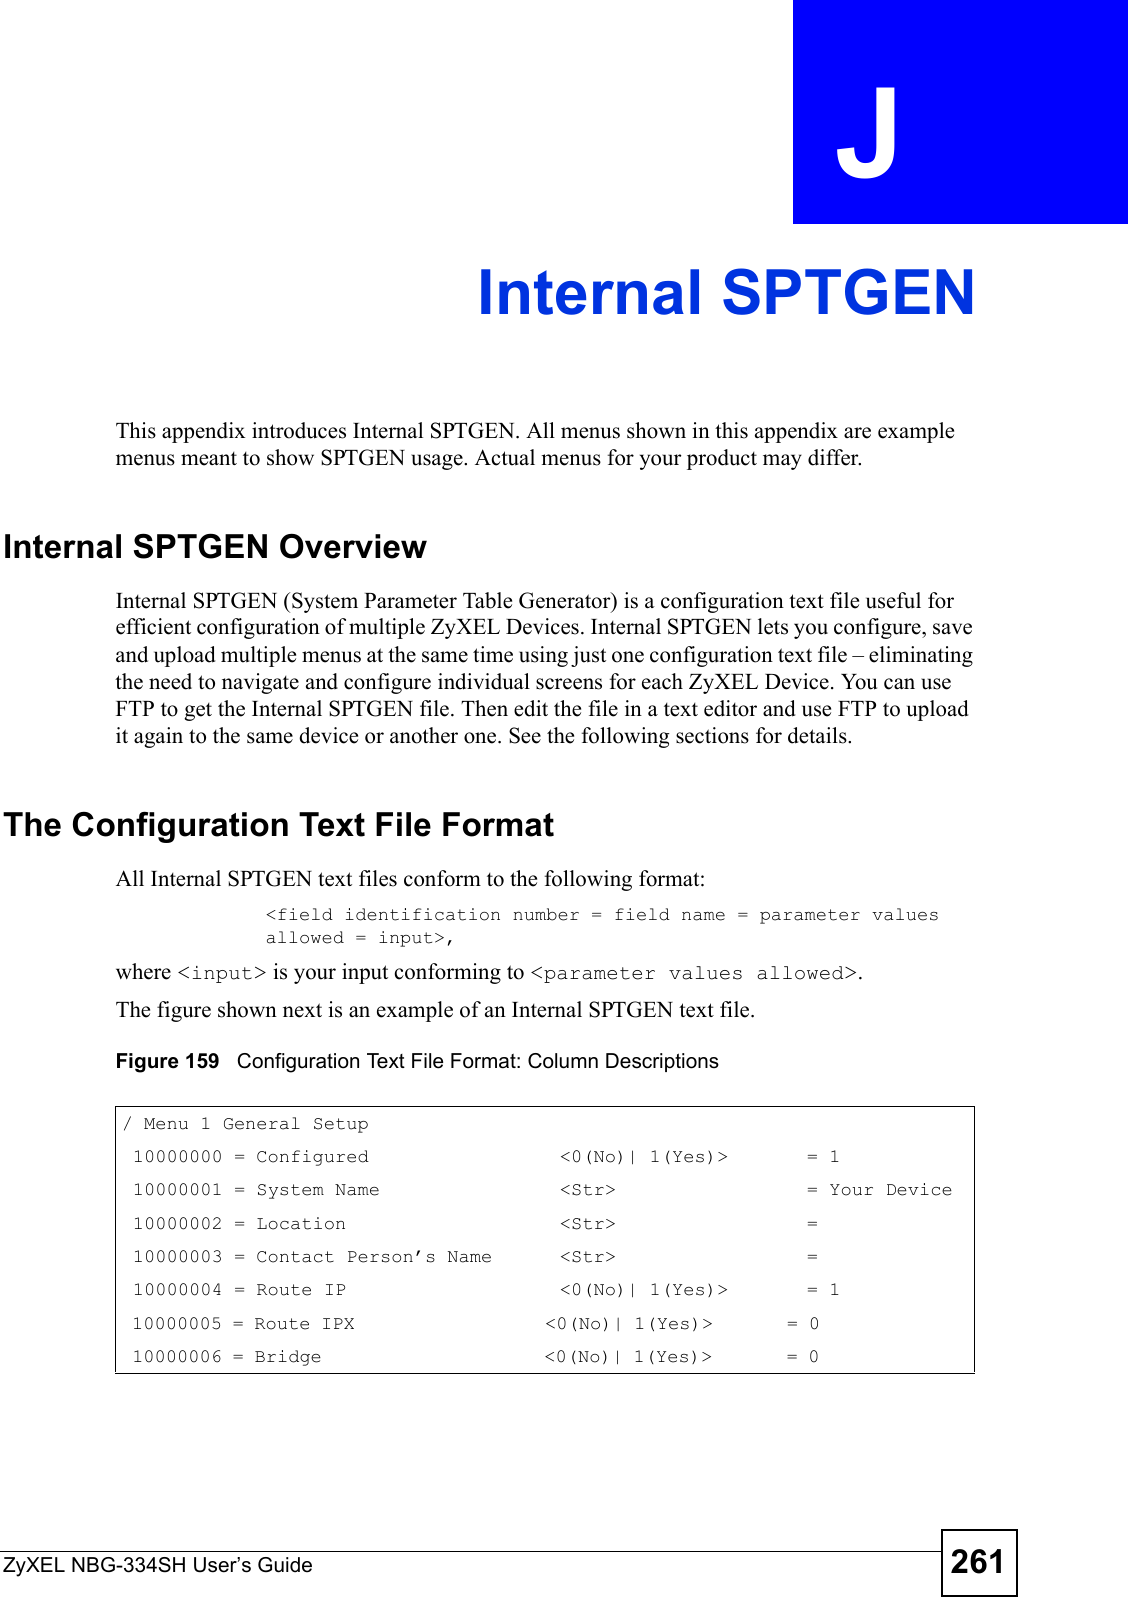 ZyXEL NBG-334SH User’s Guide 261APPENDIX  J Internal SPTGENThis appendix introduces Internal SPTGEN. All menus shown in this appendix are example menus meant to show SPTGEN usage. Actual menus for your product may differ.Internal SPTGEN OverviewInternal SPTGEN (System Parameter Table Generator) is a configuration text file useful for efficient configuration of multiple ZyXEL Devices. Internal SPTGEN lets you configure, save and upload multiple menus at the same time using just one configuration text file – eliminating the need to navigate and configure individual screens for each ZyXEL Device. You can use FTP to get the Internal SPTGEN file. Then edit the file in a text editor and use FTP to upload it again to the same device or another one. See the following sections for details. The Configuration Text File FormatAll Internal SPTGEN text files conform to the following format:&lt;field identification number = field name = parameter values allowed = input&gt;,where &lt;input&gt; is your input conforming to &lt;parameter values allowed&gt;. The figure shown next is an example of an Internal SPTGEN text file.Figure 159   Configuration Text File Format: Column Descriptions/ Menu 1 General Setup     10000000 = Configured                 &lt;0(No)| 1(Yes)&gt;       = 1     10000001 = System Name                &lt;Str&gt;                 = Your Device 10000002 = Location                   &lt;Str&gt;                 =      10000003 = Contact Person’s Name      &lt;Str&gt;                 =      10000004 = Route IP                   &lt;0(No)| 1(Yes)&gt;       = 1     10000005 = Route IPX                  &lt;0(No)| 1(Yes)&gt;       = 0               10000006 = Bridge                     &lt;0(No)| 1(Yes)&gt;       = 0              